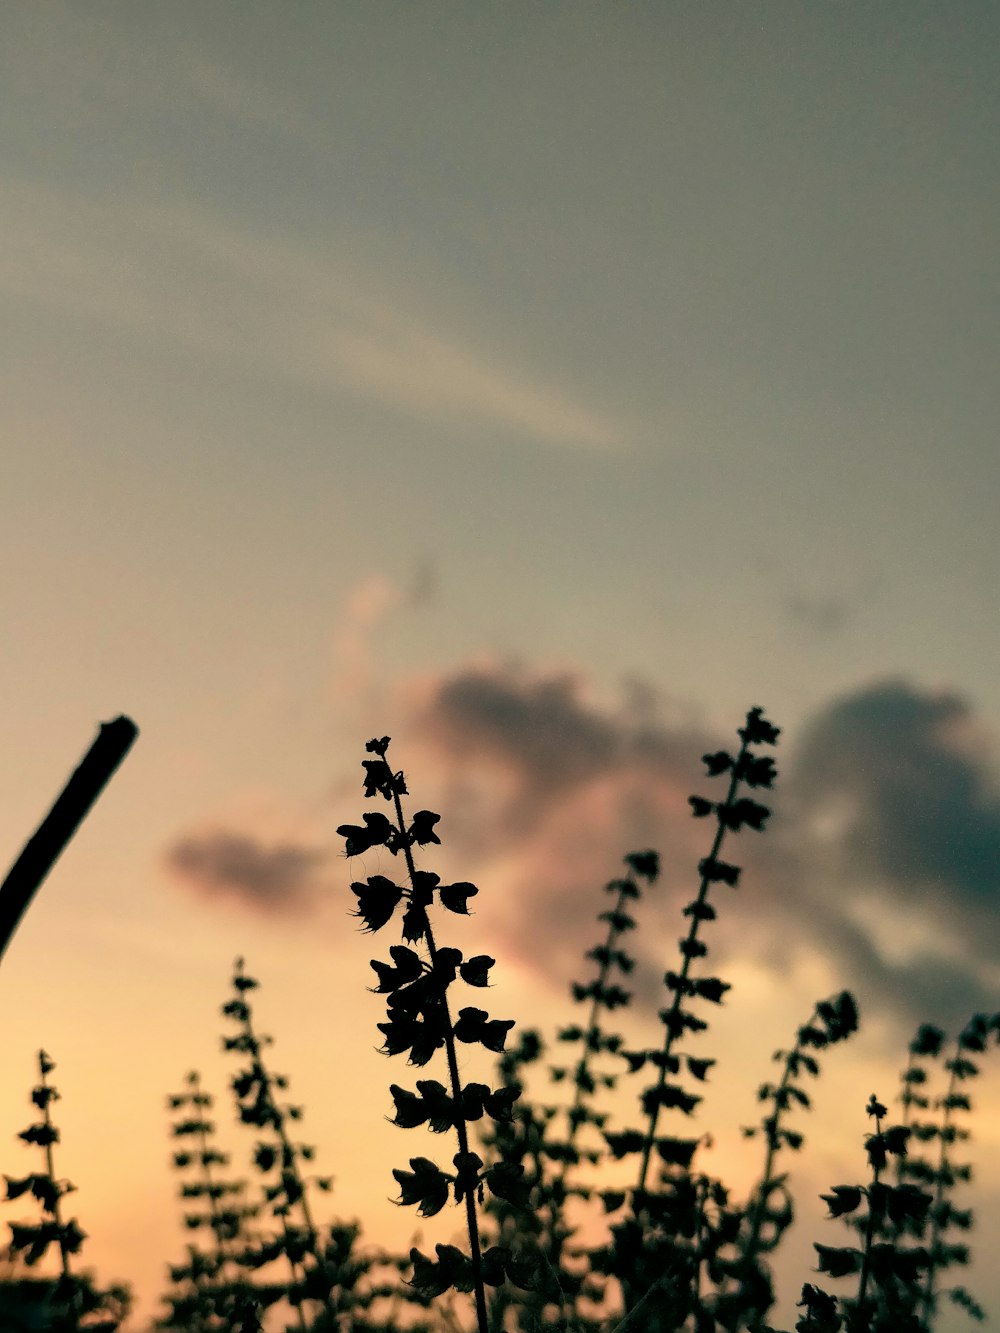 a picture of a plant with a sky in the background